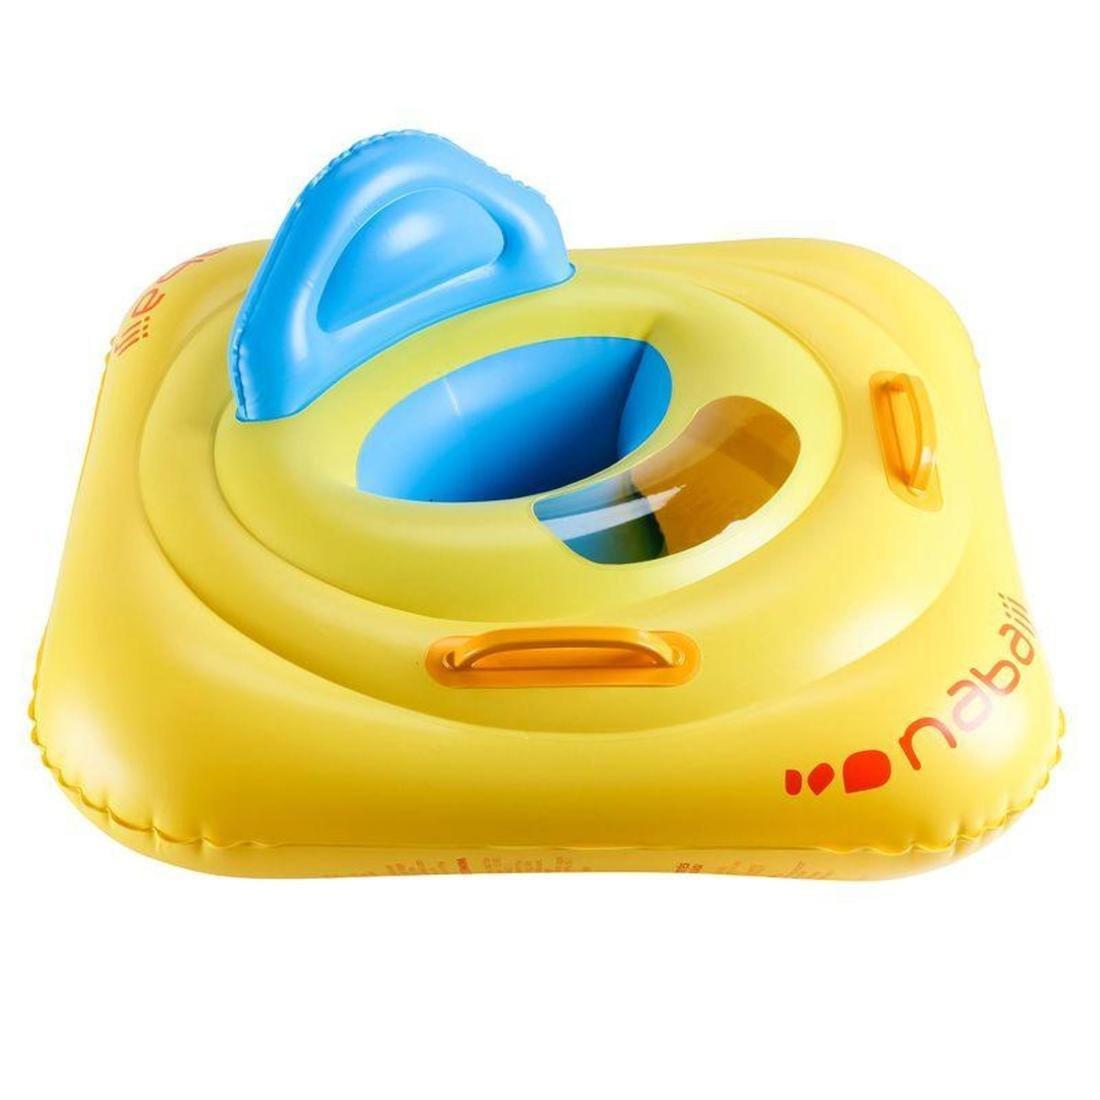 NABAIJI - Inflatable Baby Seat Buoy For Swimming Pool With Porthole With Handles, Yellow